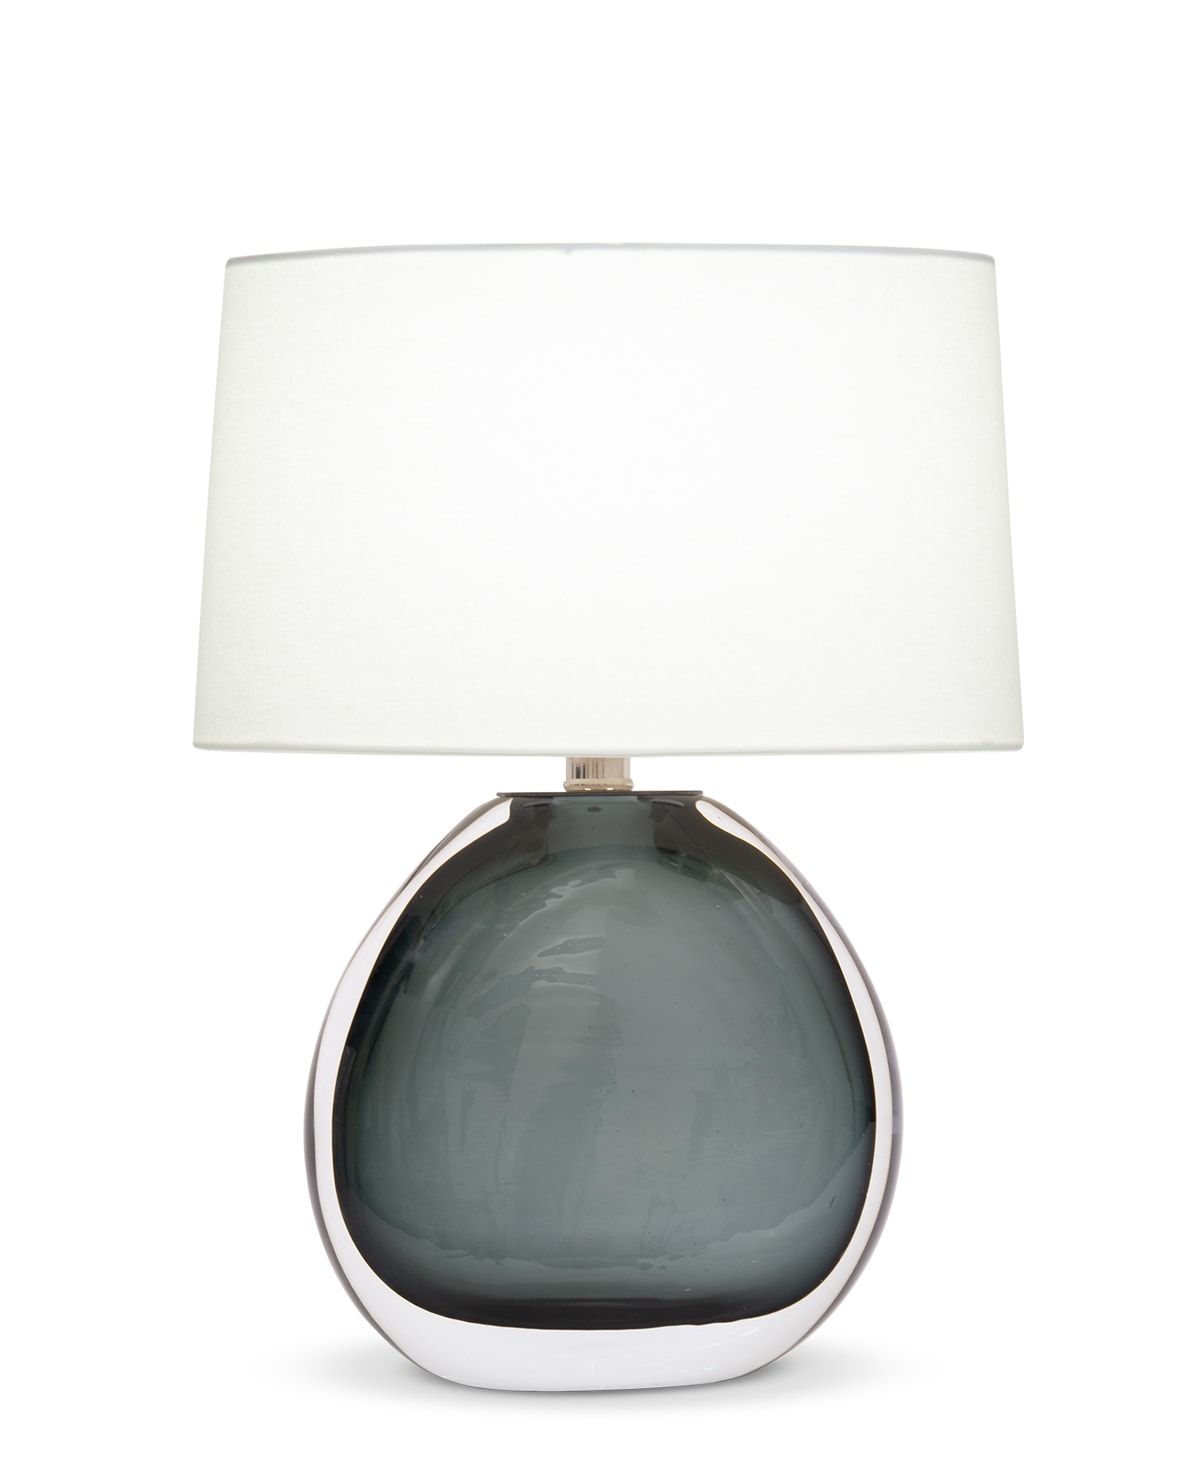 FlowDecor Nellie Table Lamp in glass with smokey grey and off-white linen oval shade (# 4563)